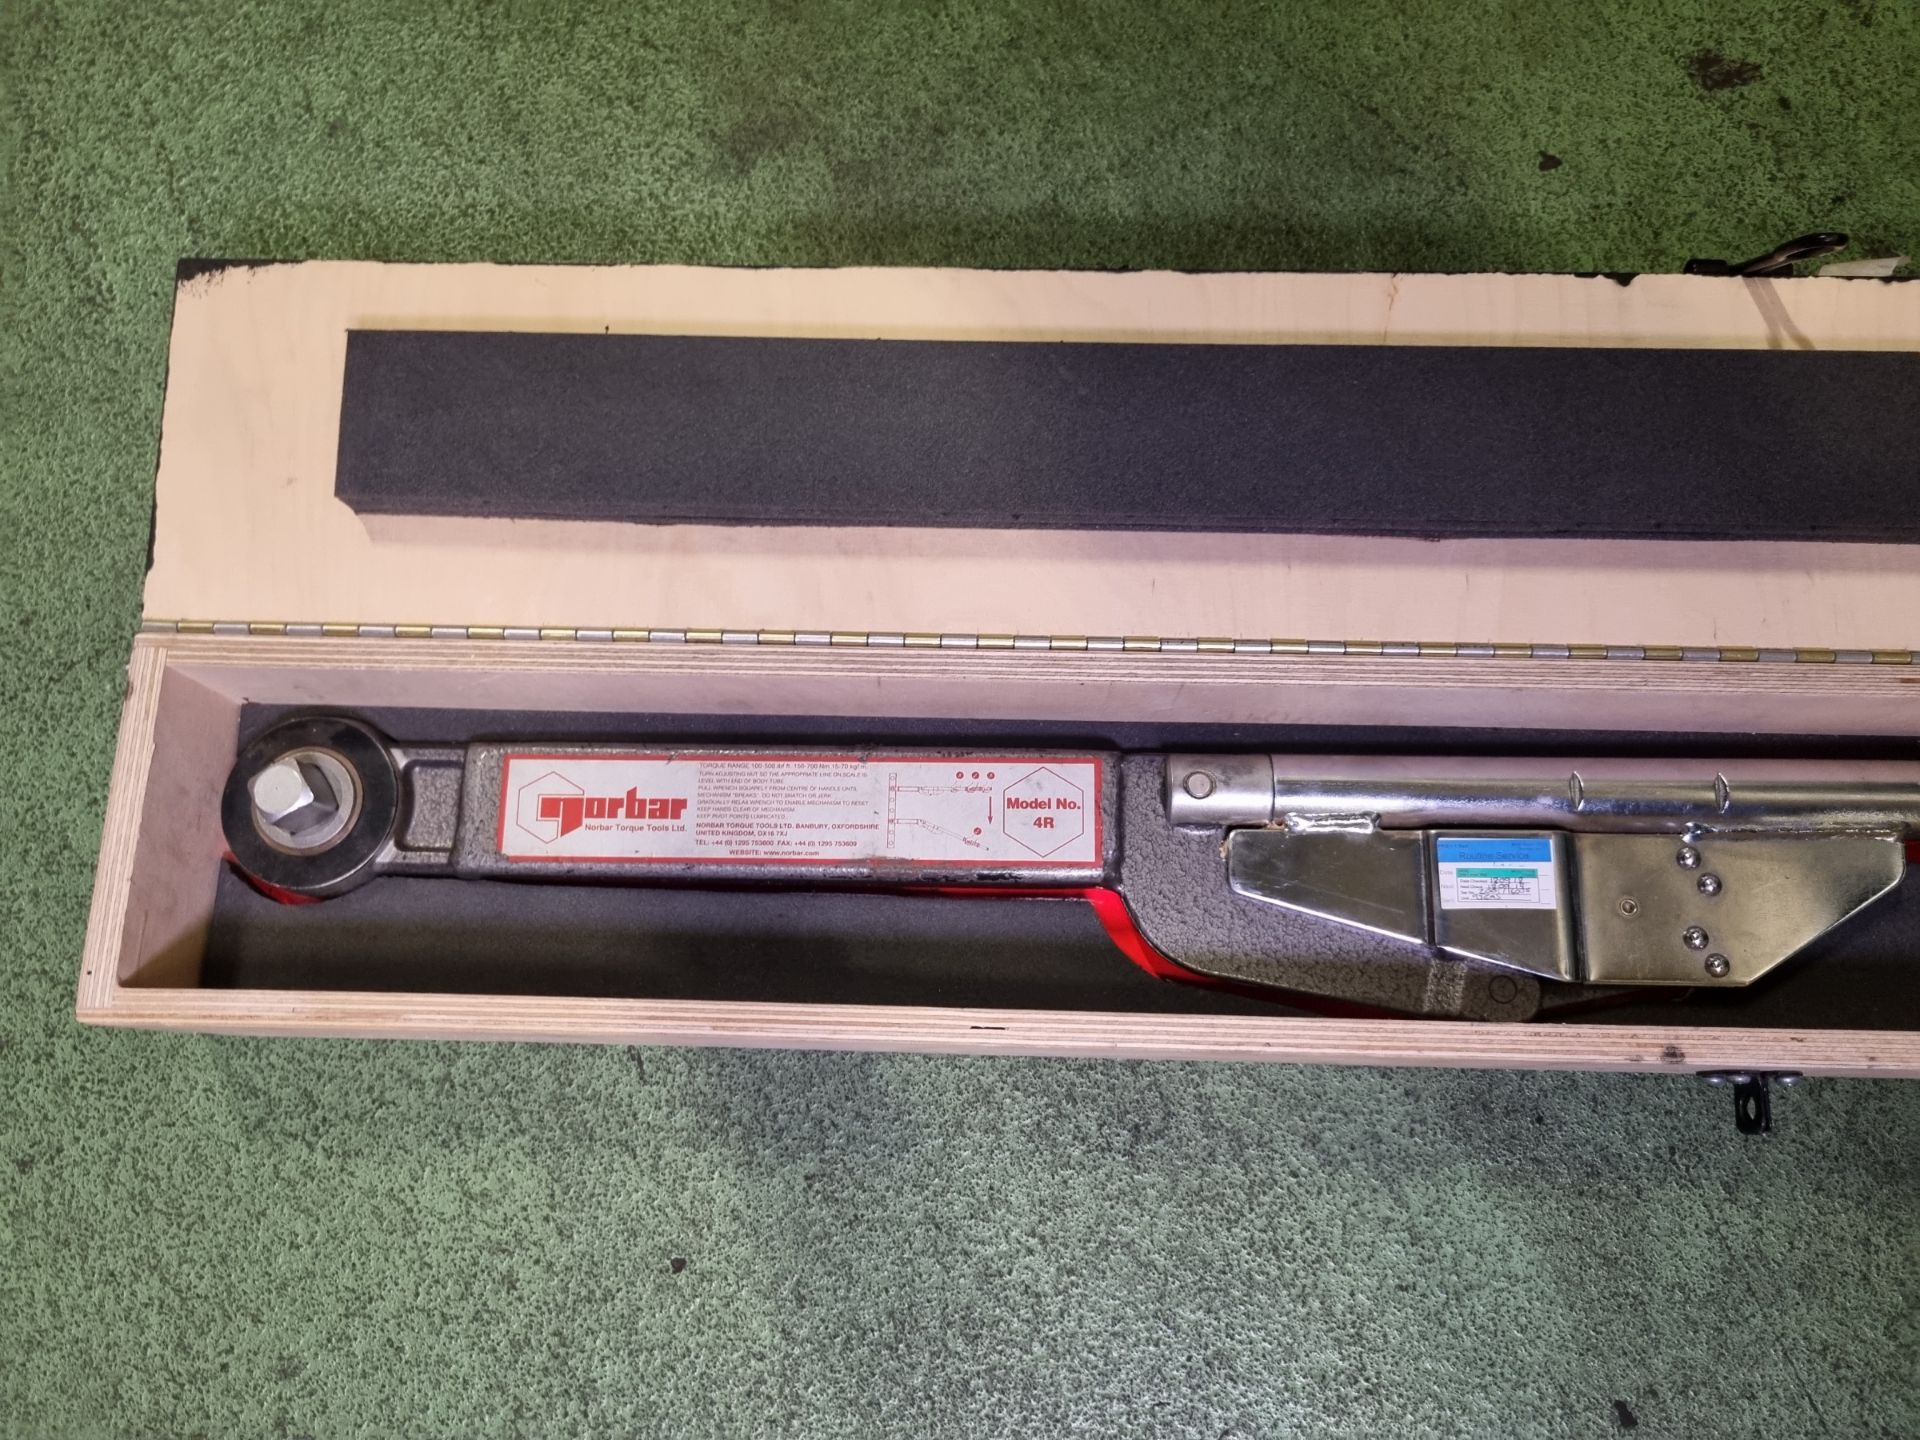 Norbar Industrial 4R, 3/4 inch torque wrench - wooden box - Image 2 of 5